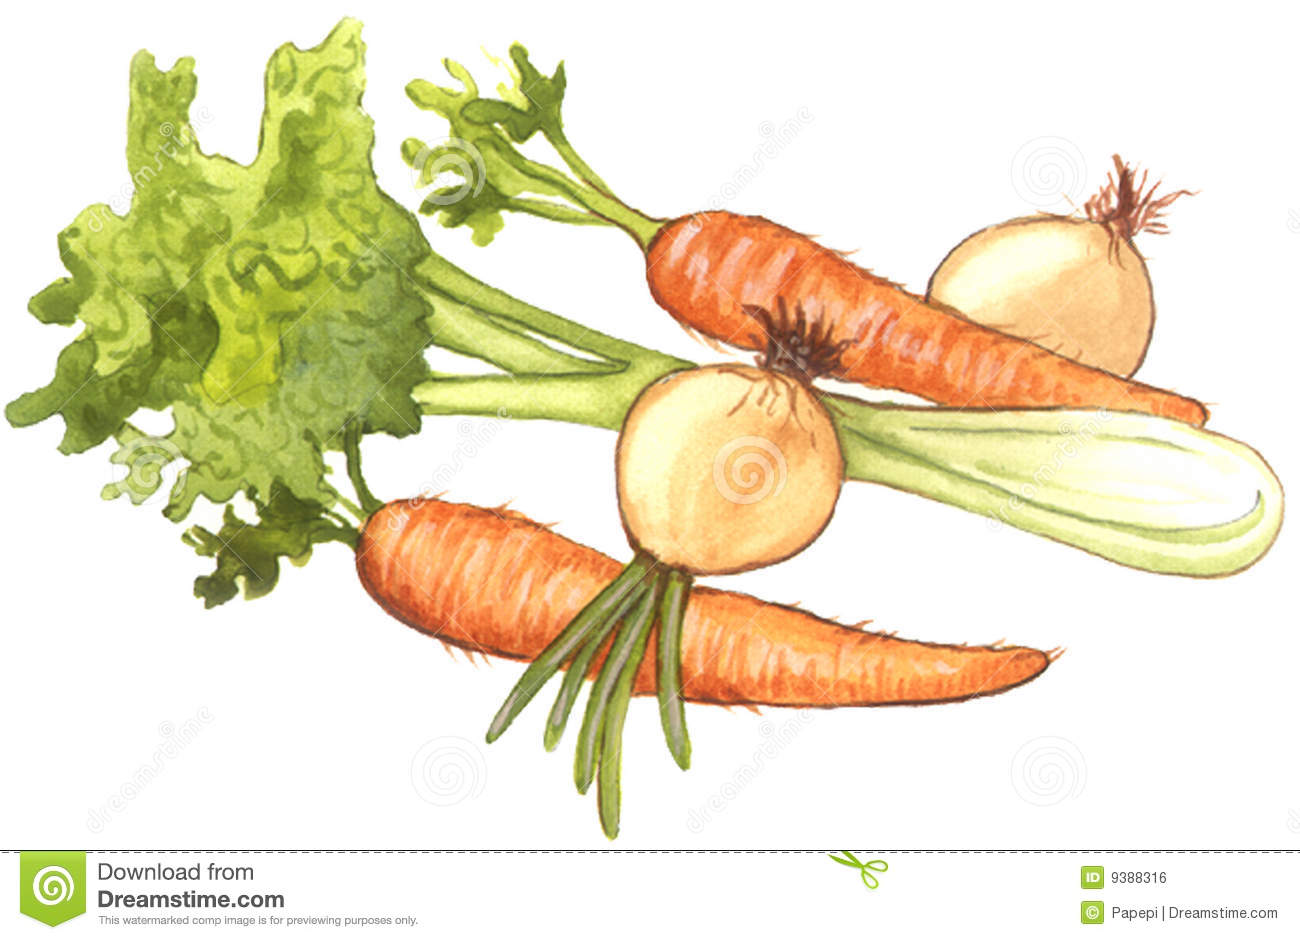 Celeryonions And Carrots Royalty Free Stock Image   Image  9388316